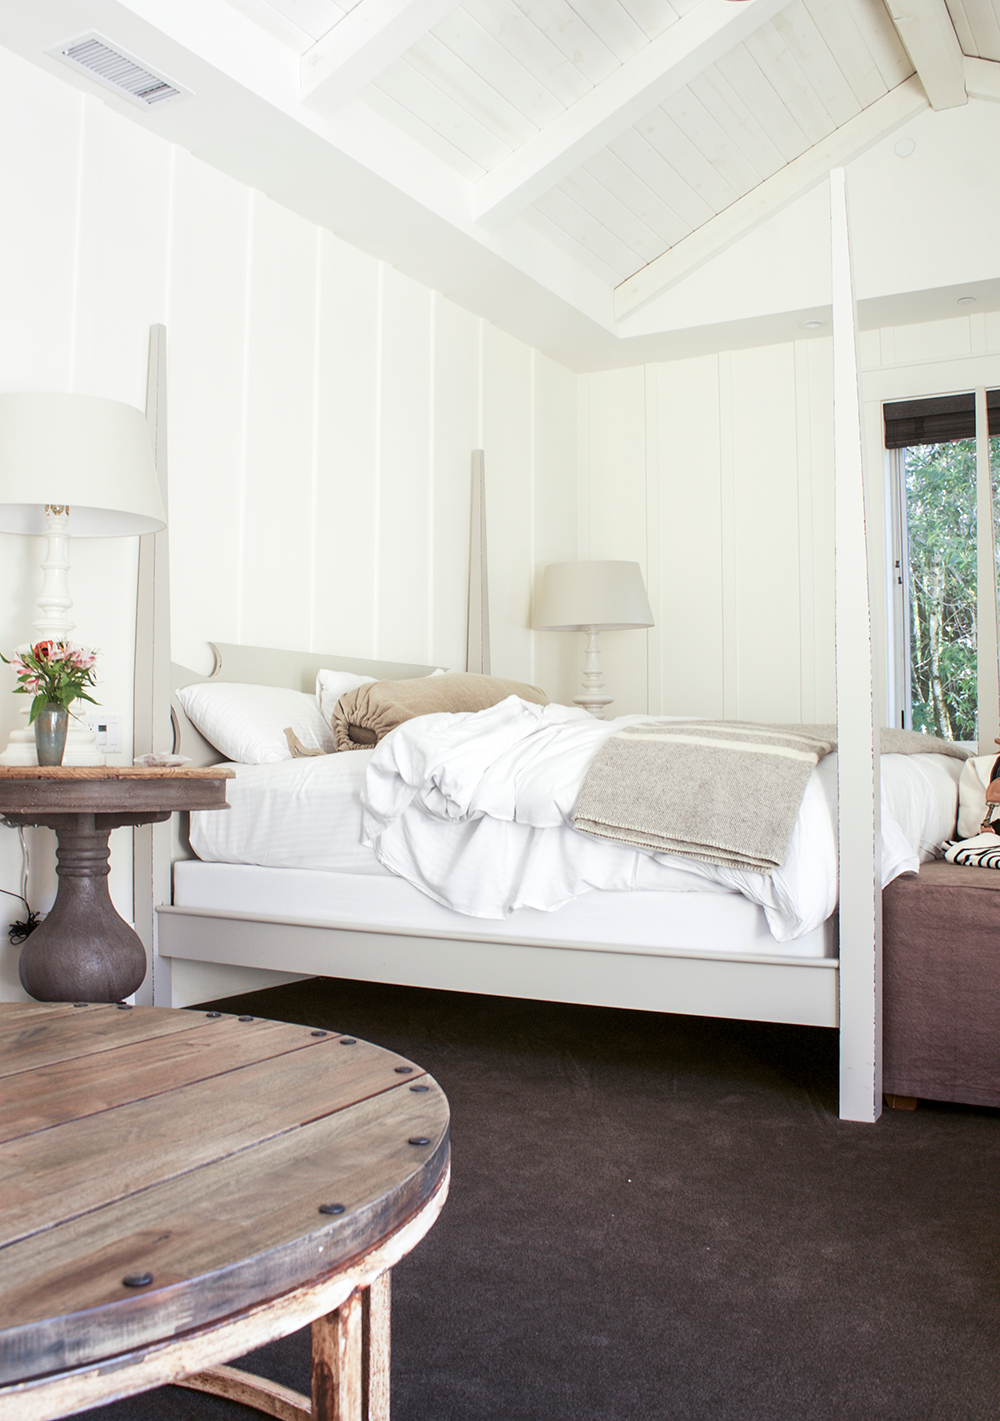 Exploring the designer destination: the Farmhouse Inn in Forestville, Sonoma County, California | Get the look with Copy Cat Chic